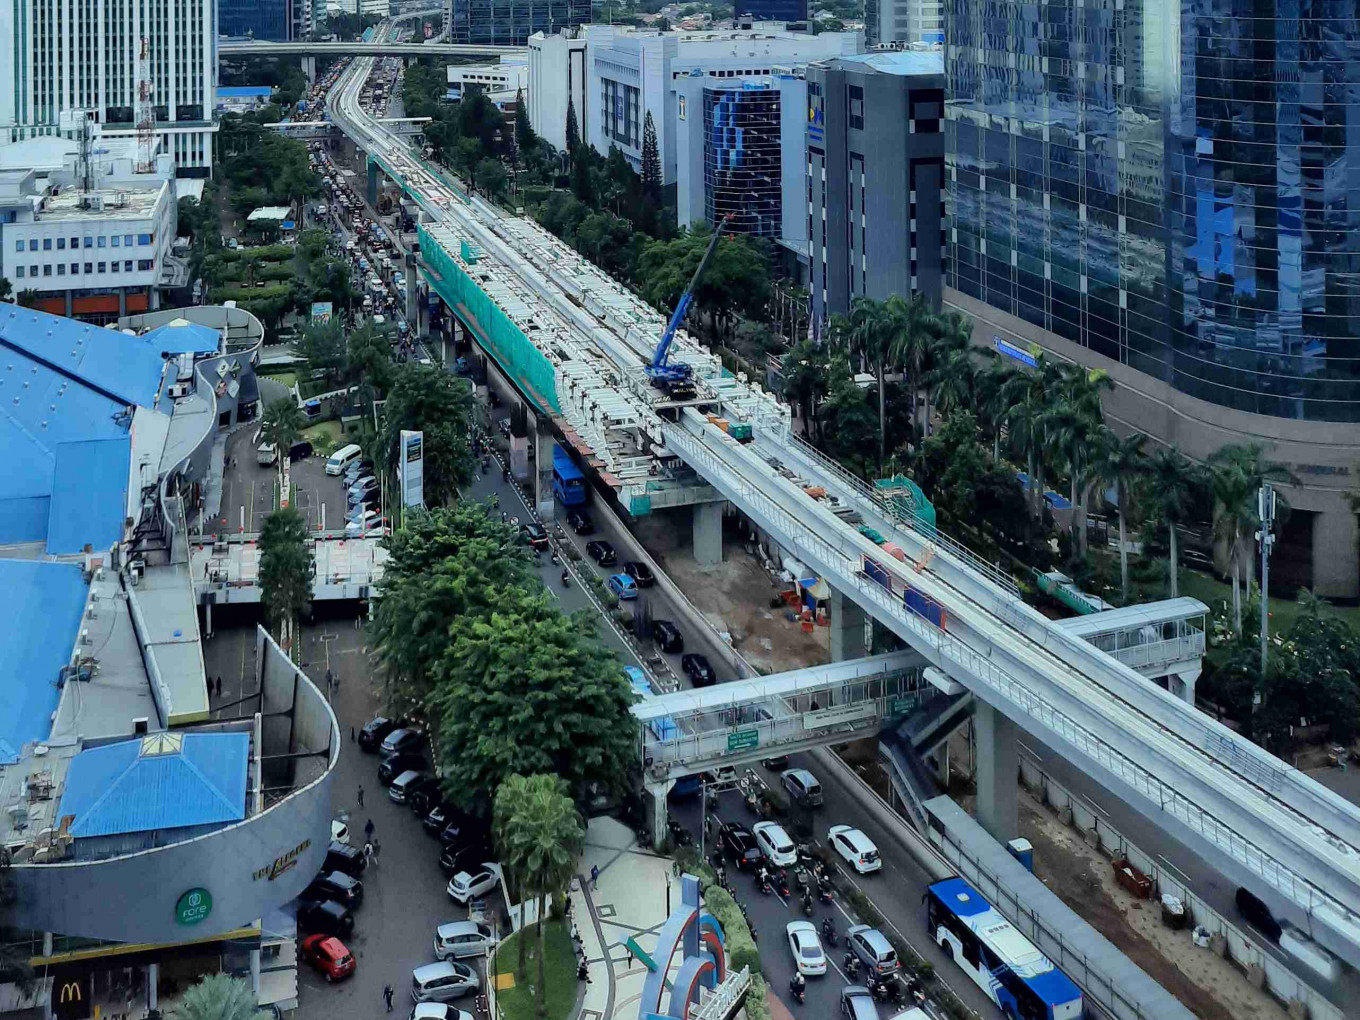 Traffic jam: Jakarta roads remain one of world's most congested - City